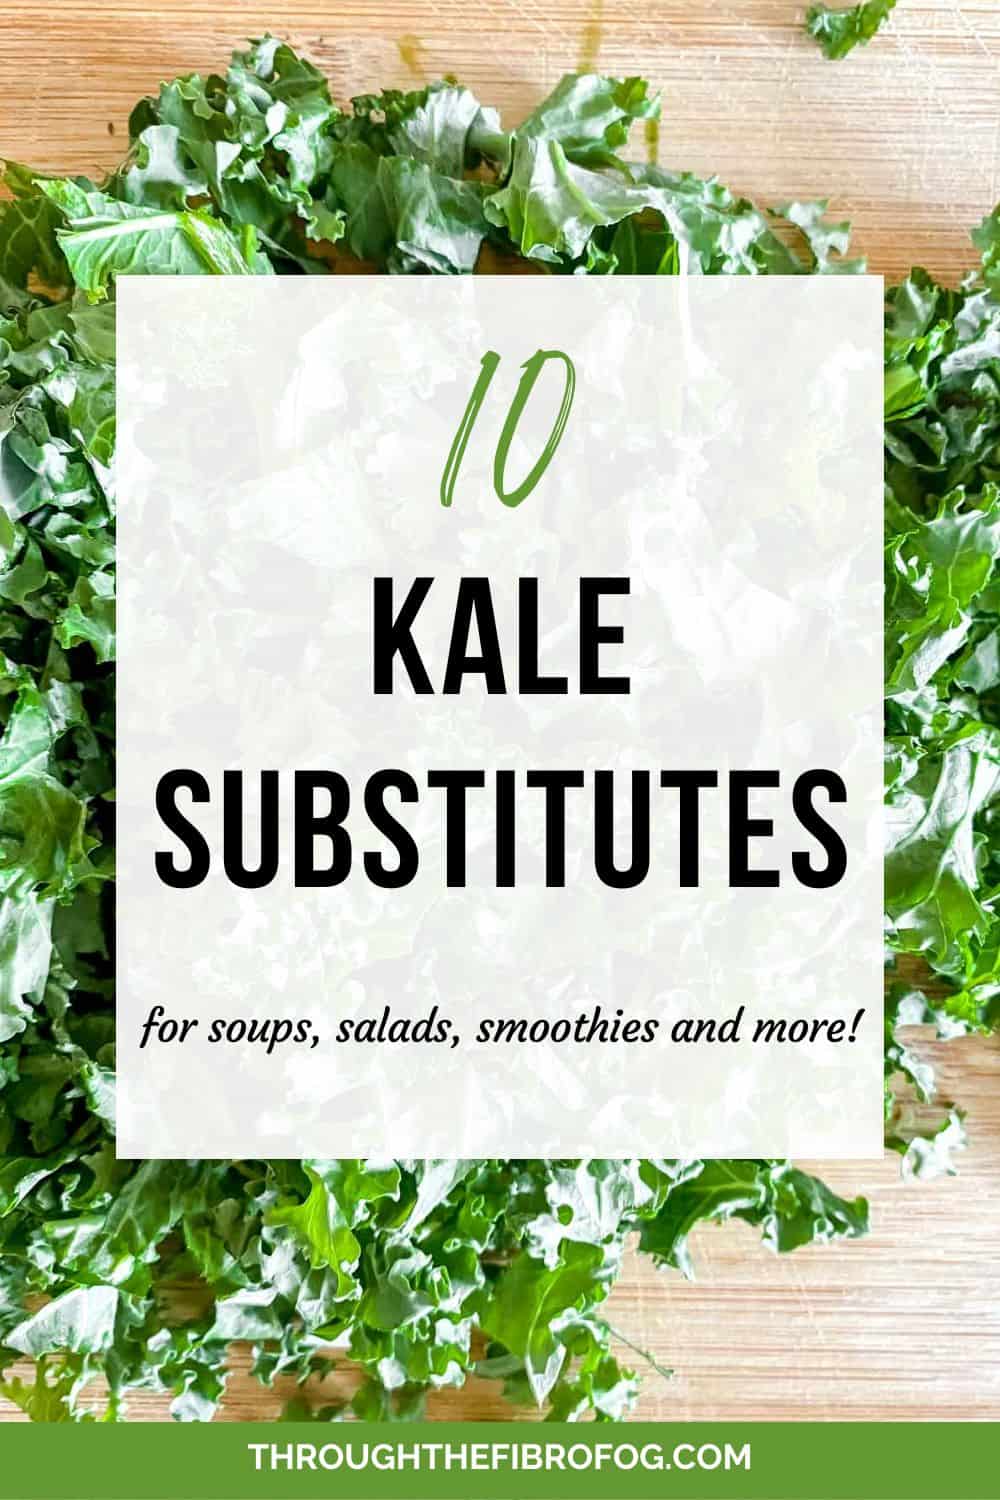 diced kale on a wooden board with text ten kale substitutes for soups, salads, smoothies and more.